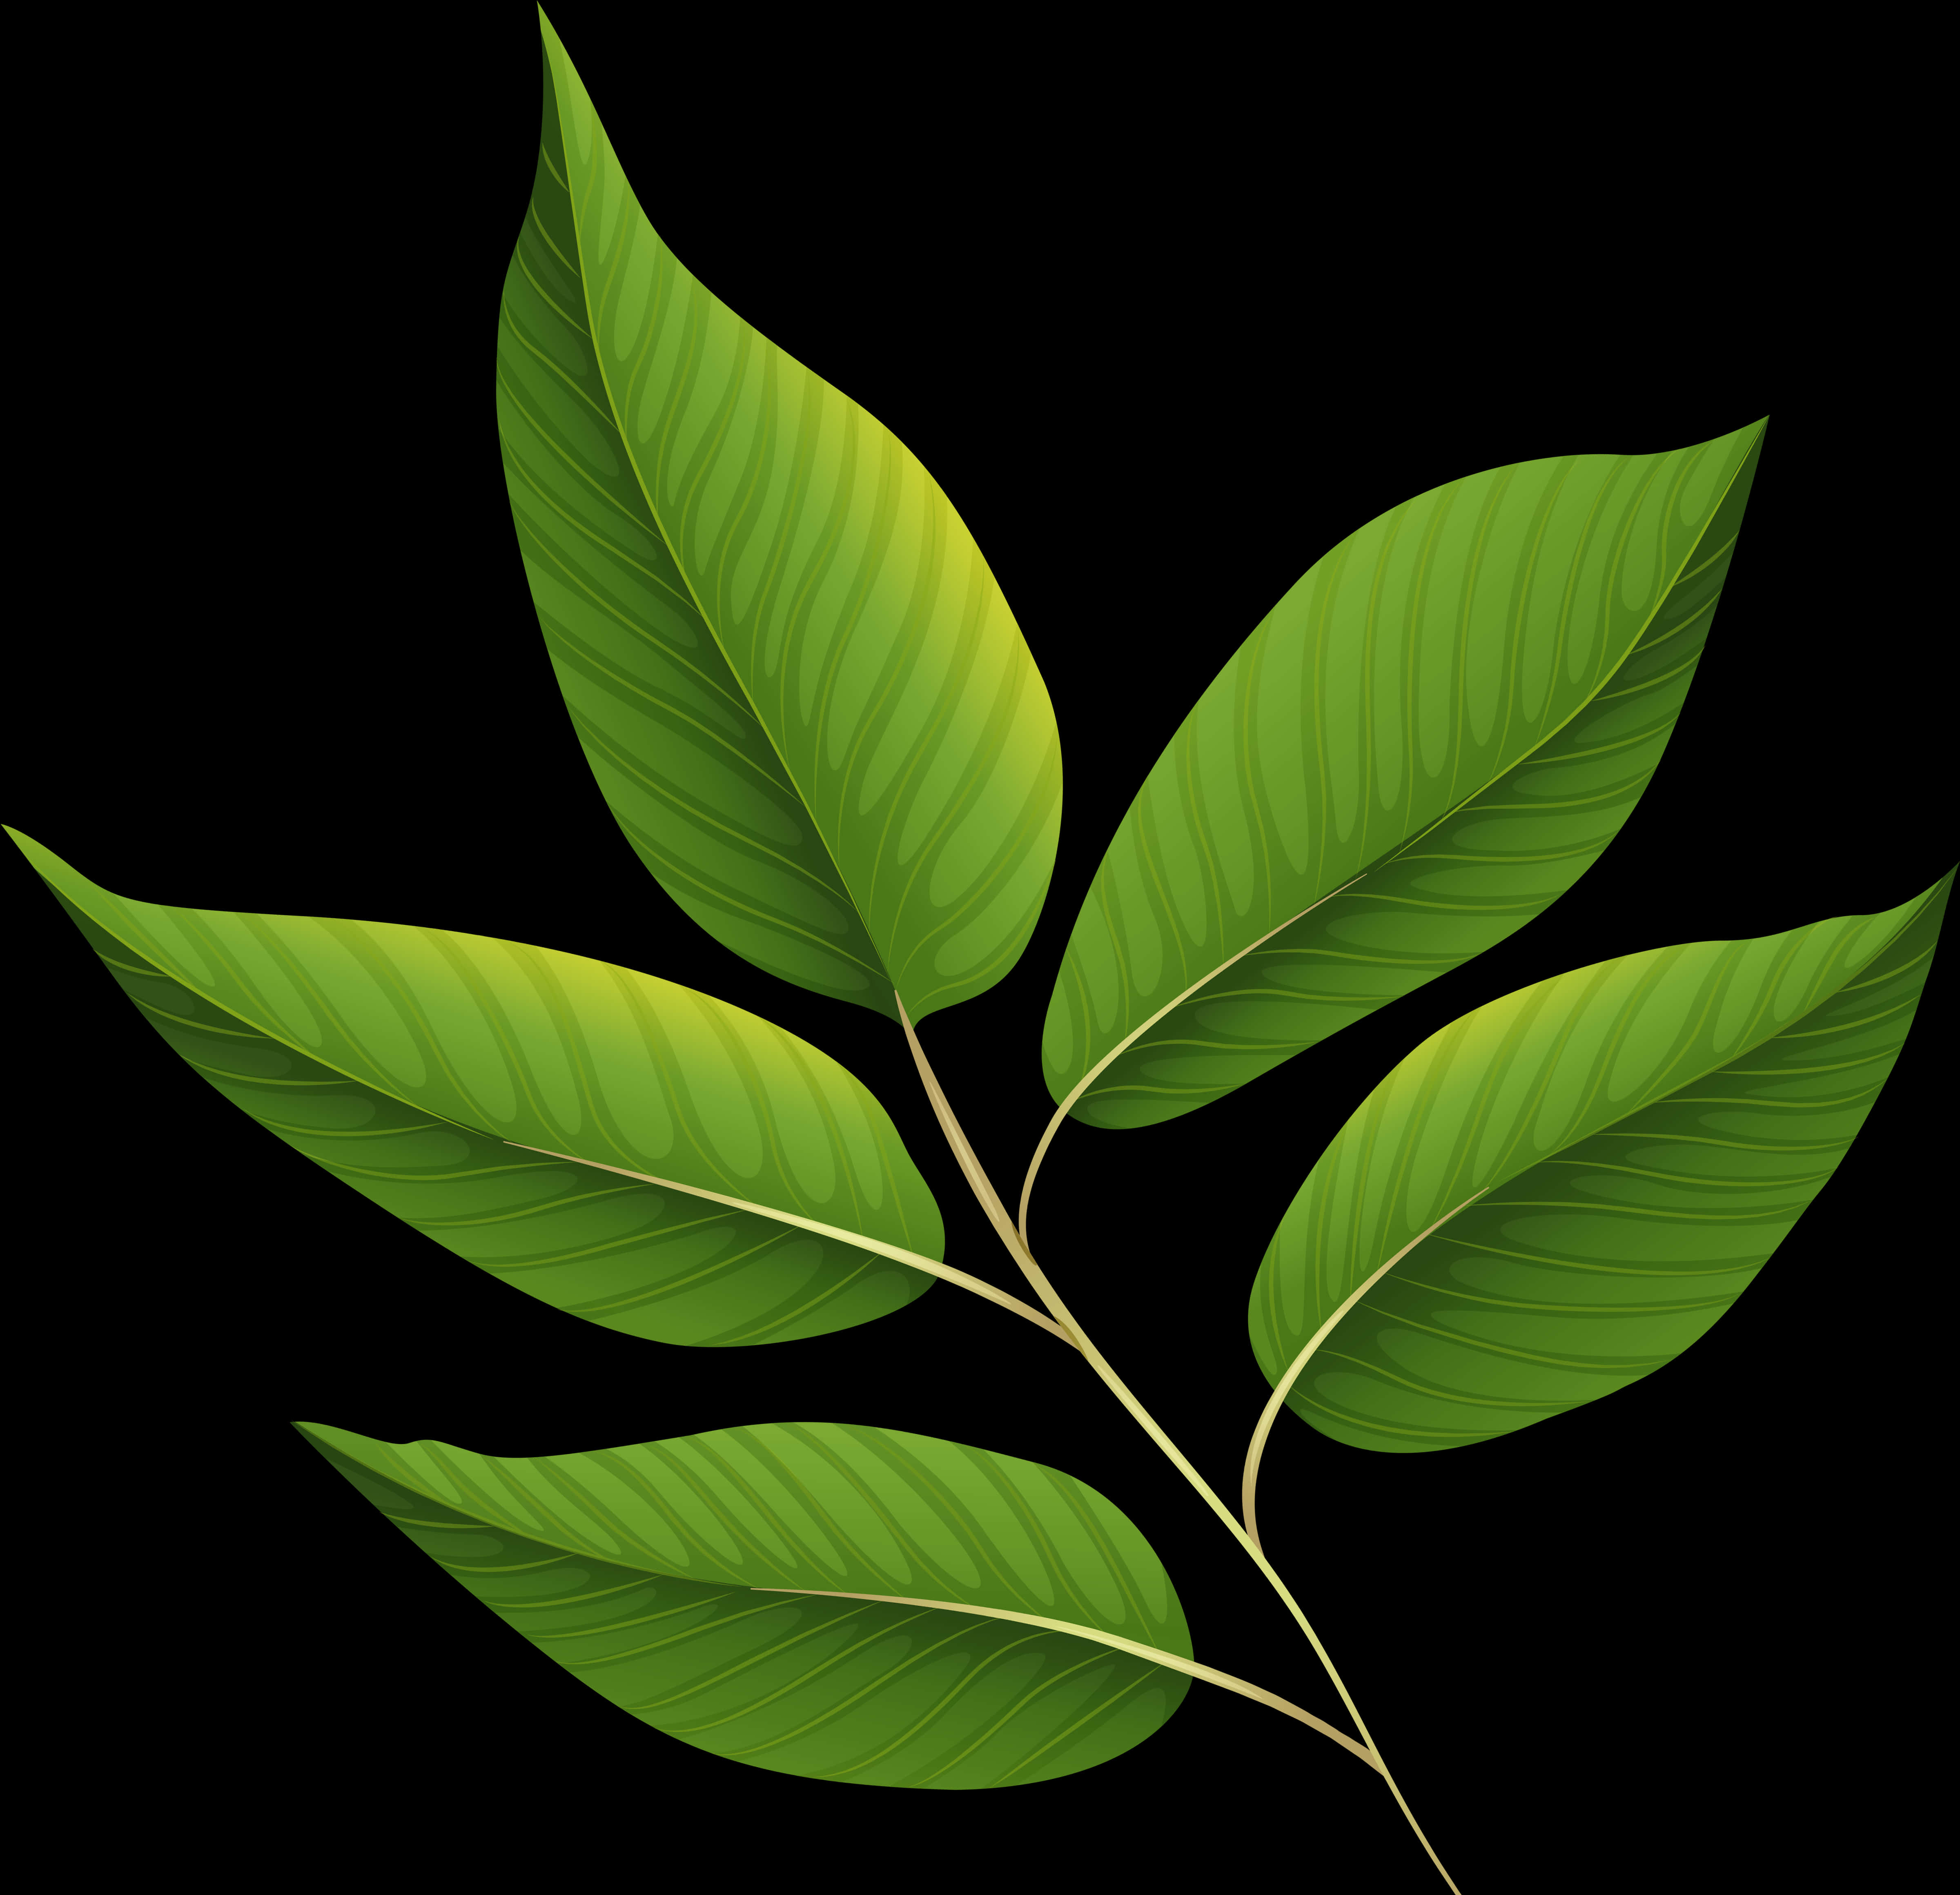 A Green Leafy Plant With Black Background